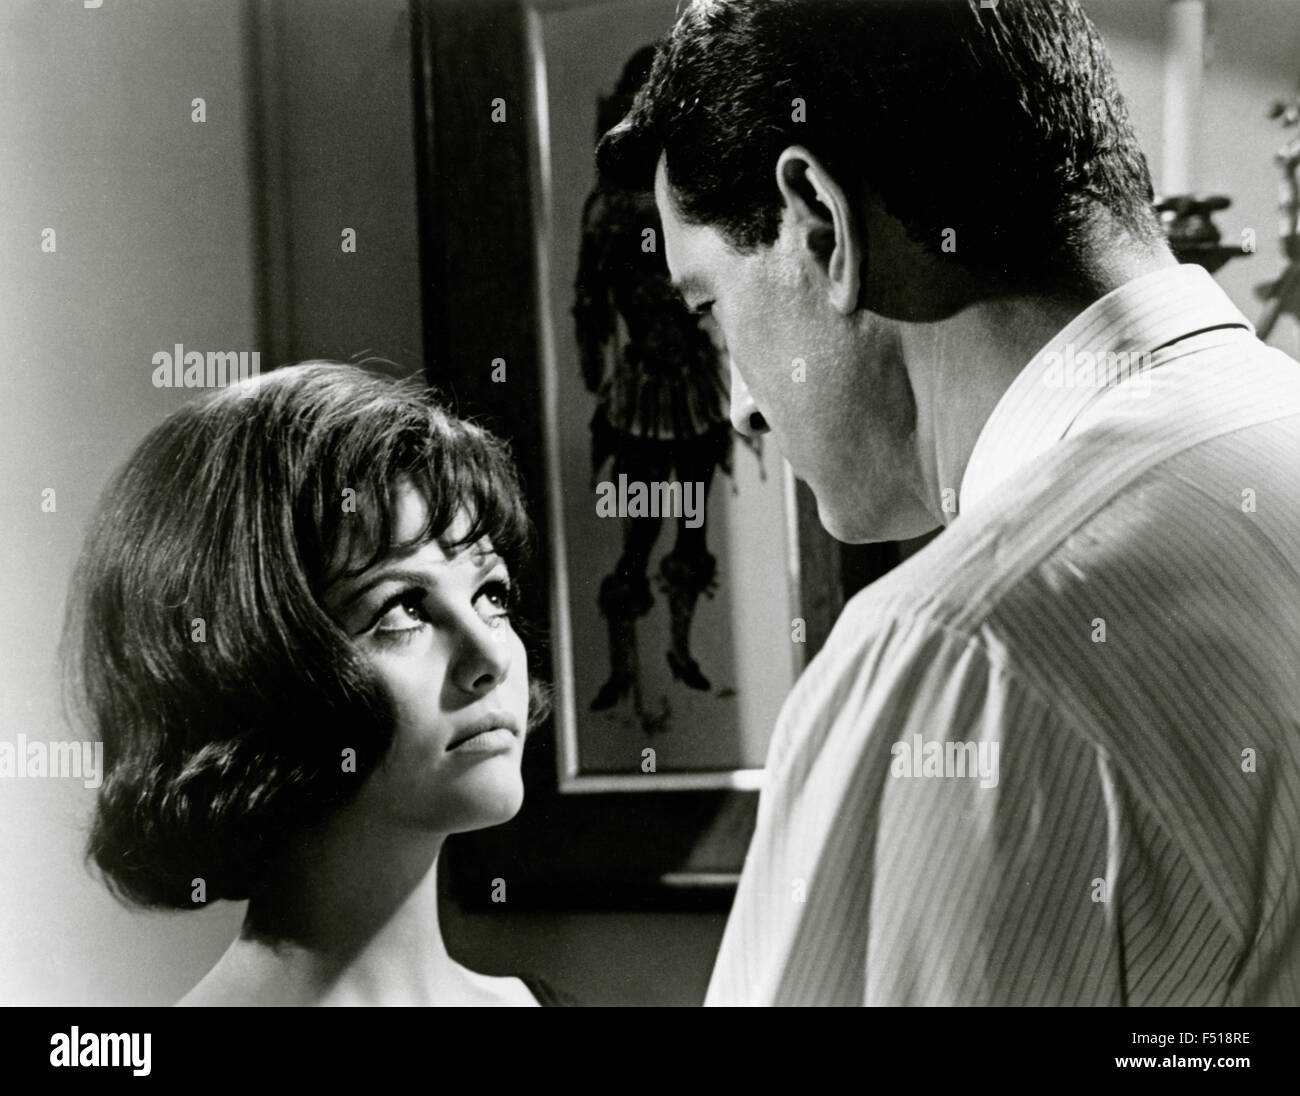 The actors Rock Hudson and Claudia Cardinale in a scene from the film ...